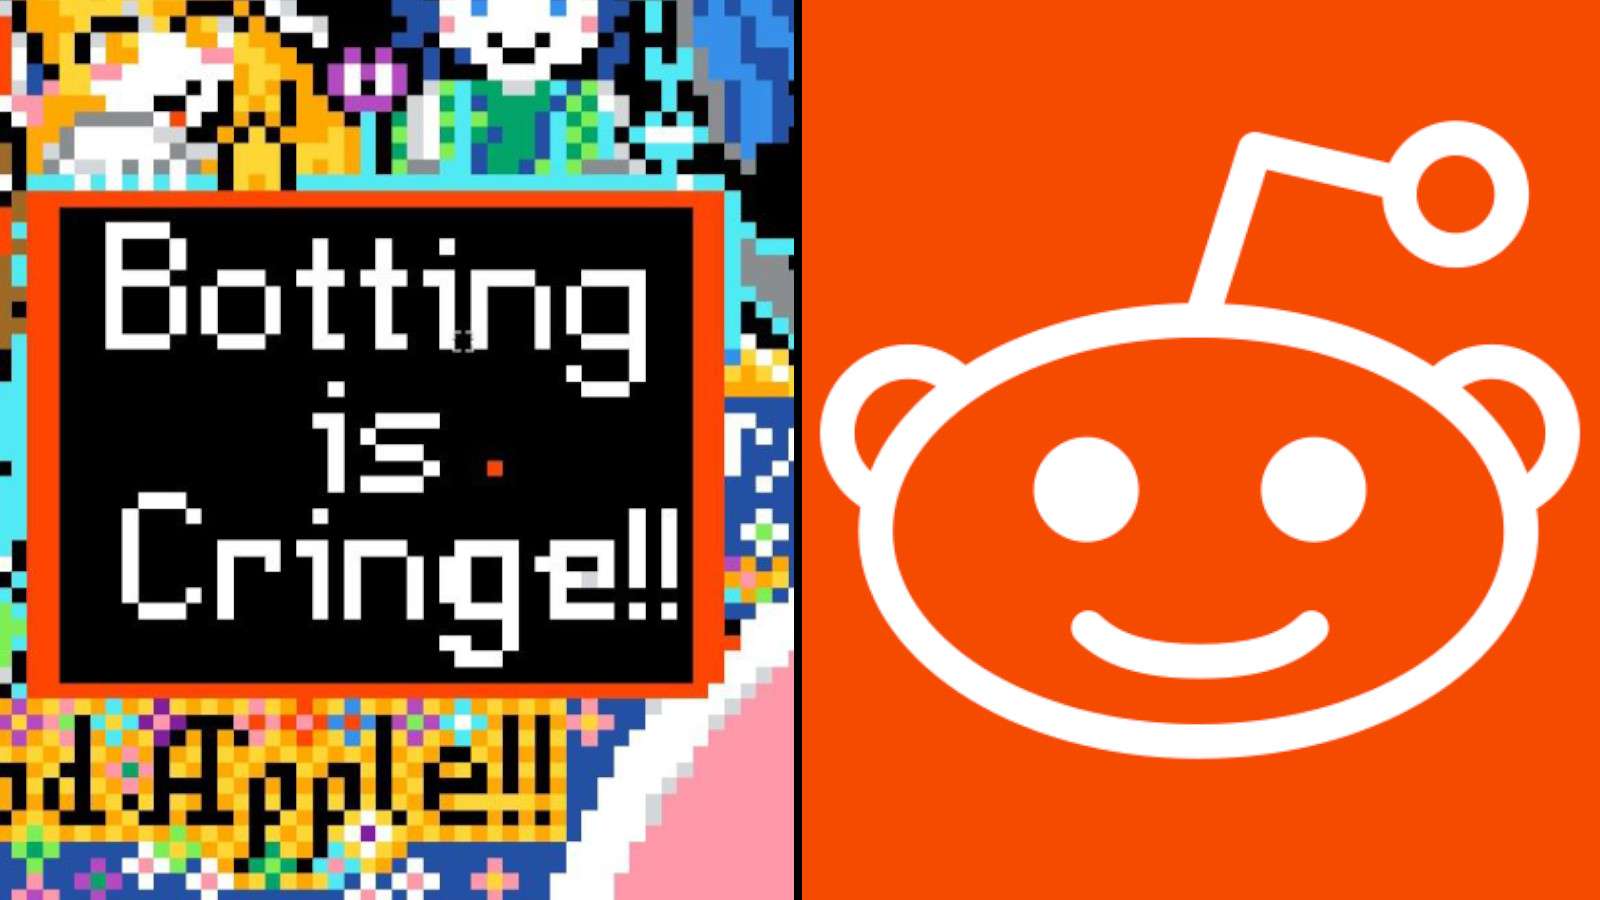 r/place reddit users beg for moderation against bots